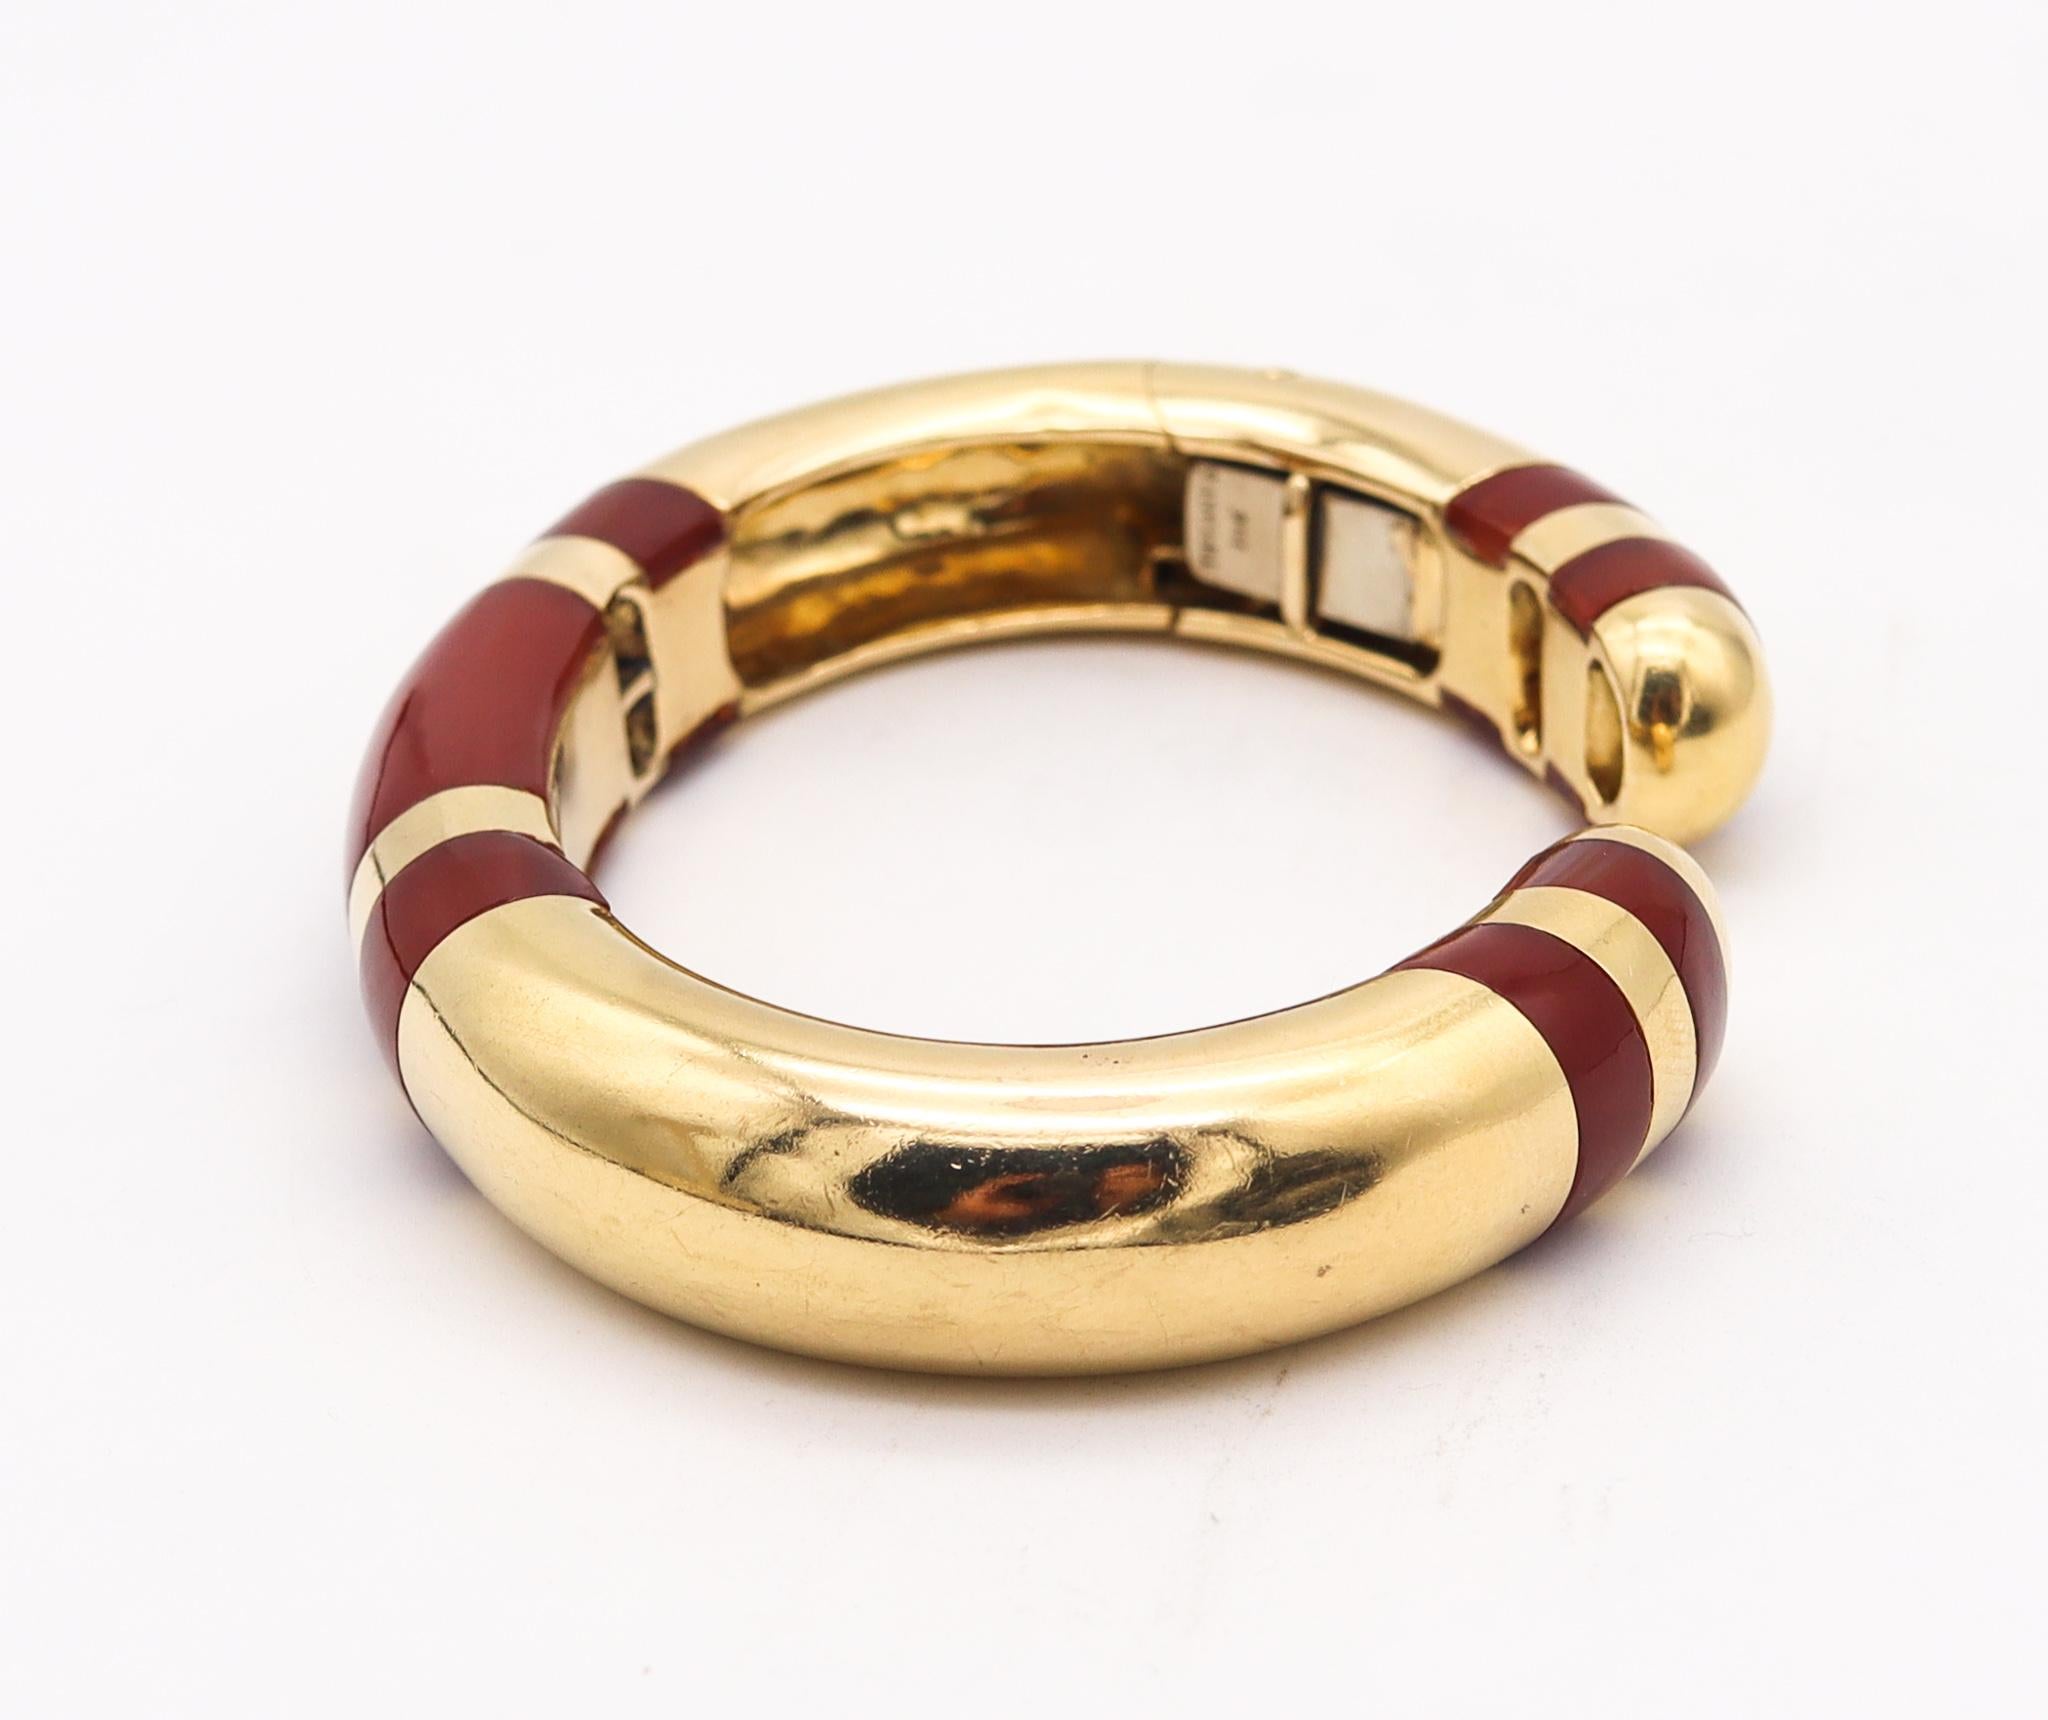 Modernist Tiffany & Co 1973 Sonia Younis Bracelet Cuff in 18kt Yellow Gold with Carnelian